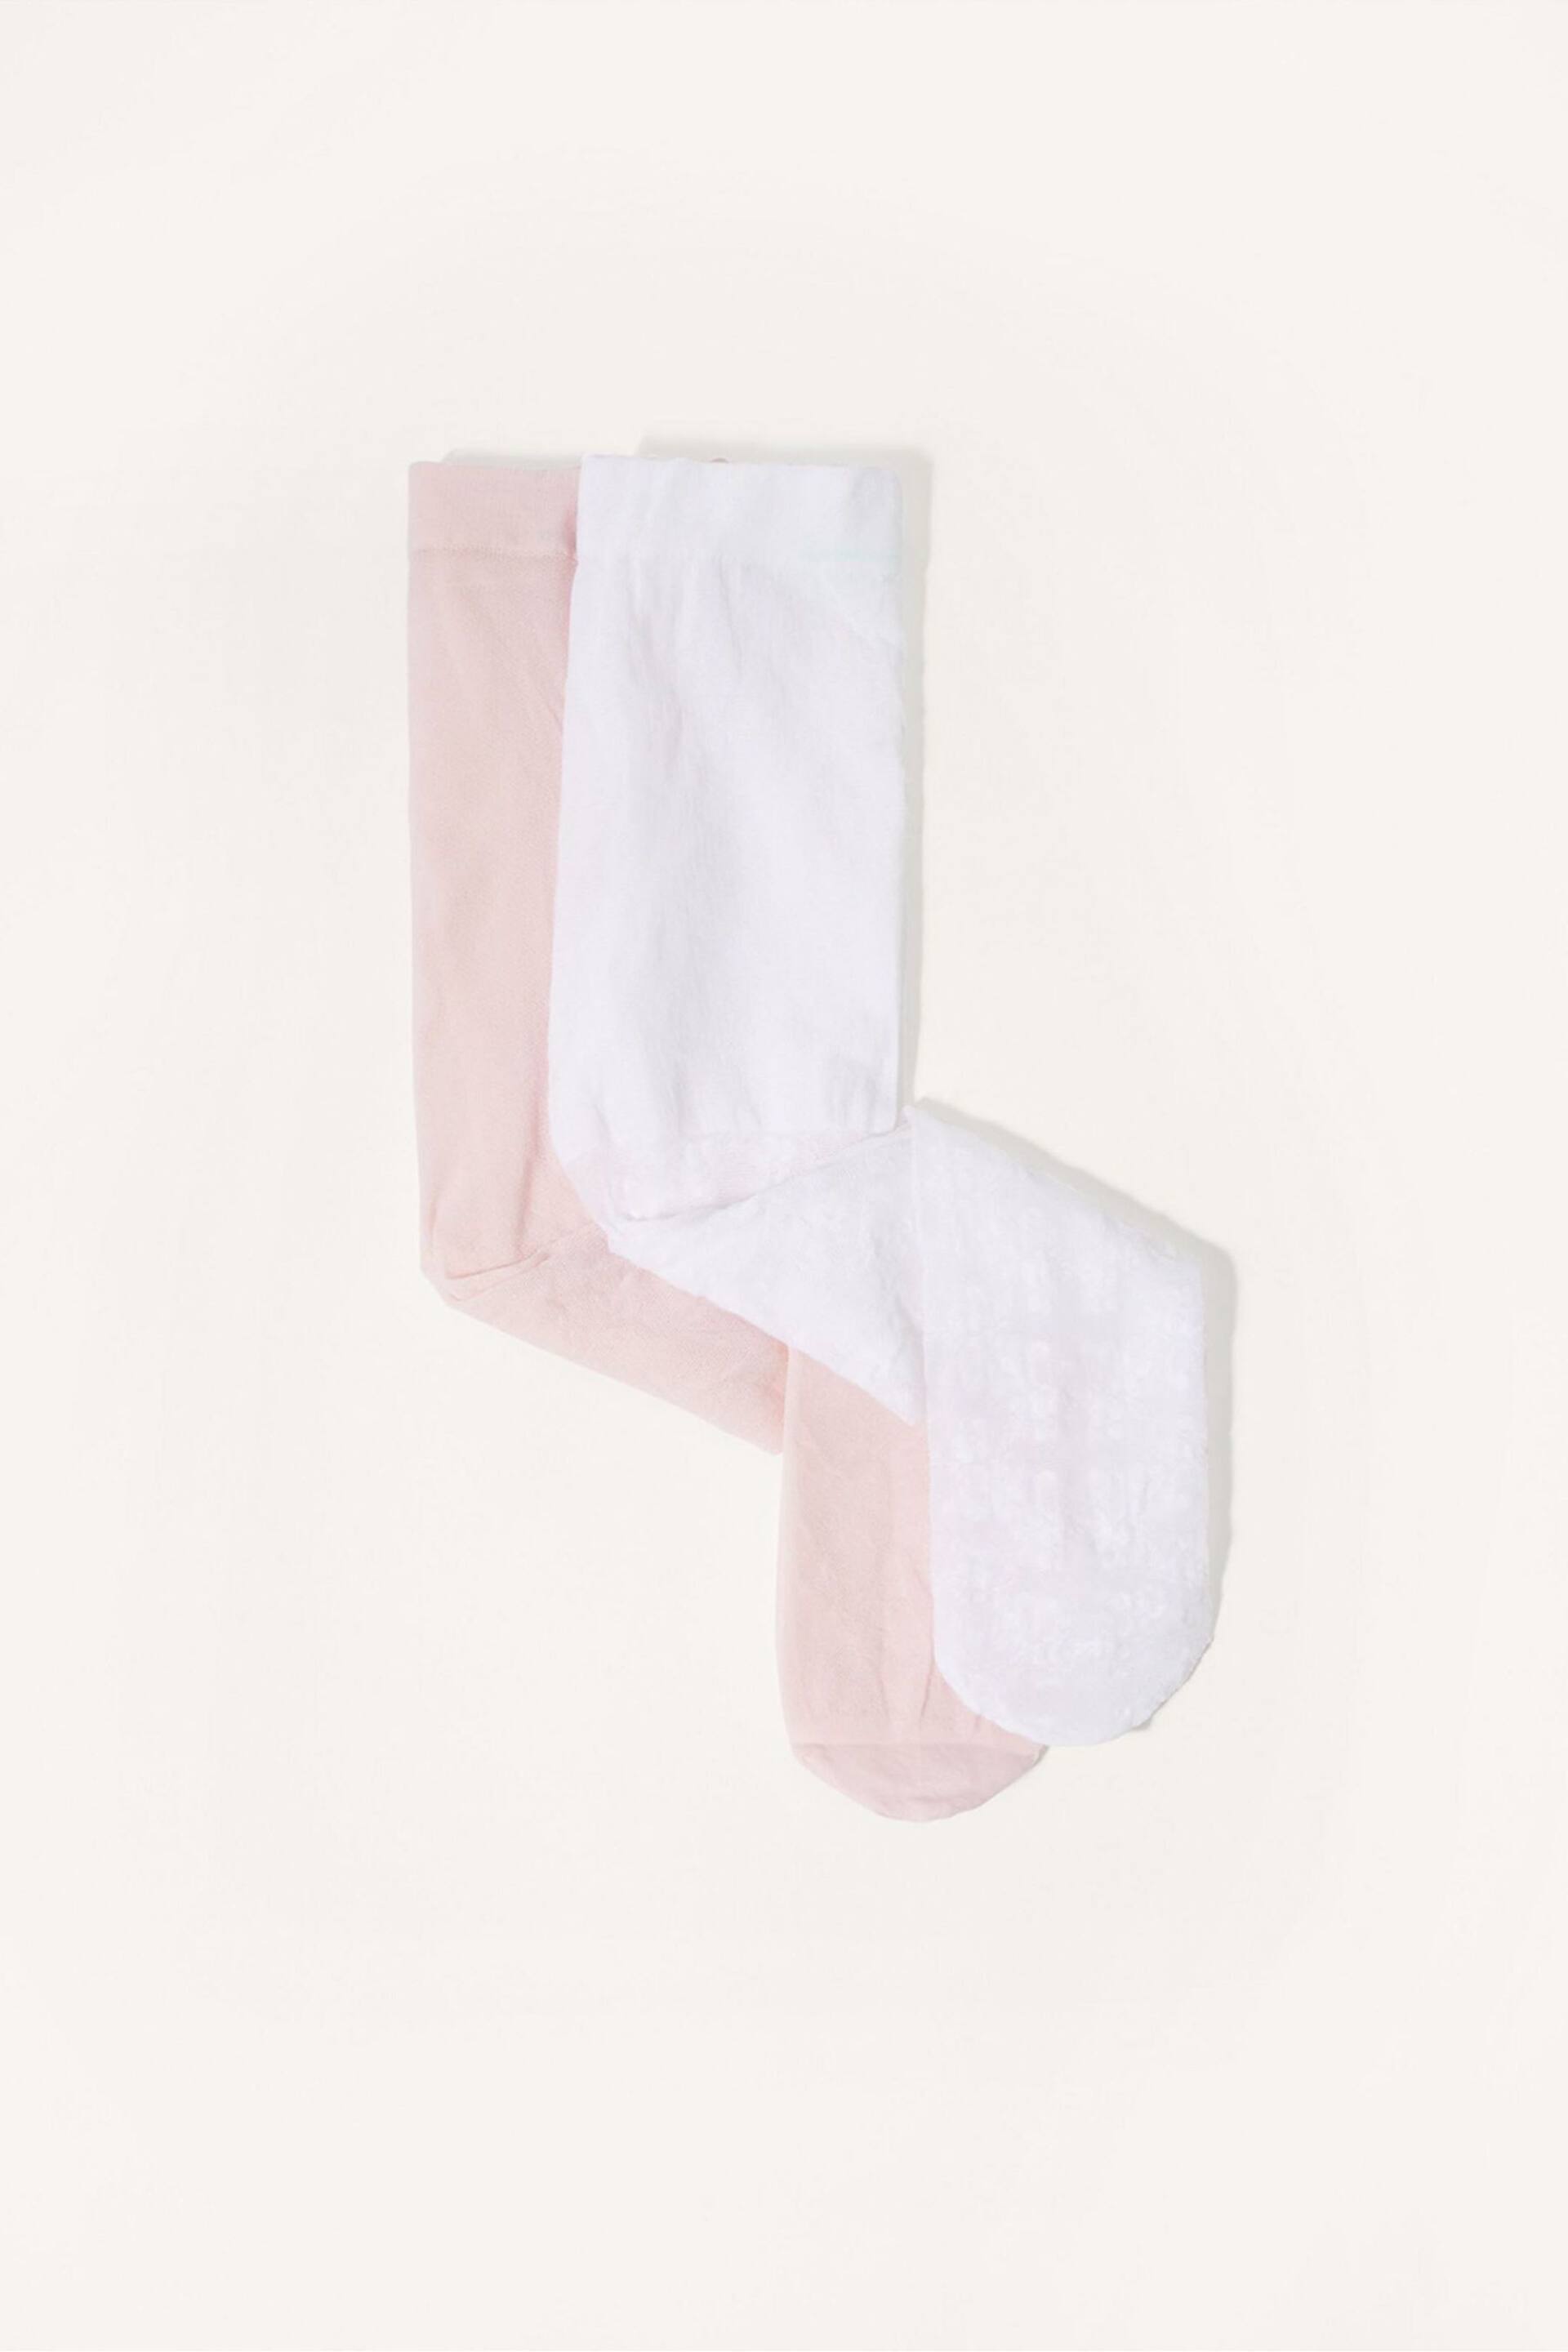 Monsoon Pink Baby Lace Tights 2 Pack - Image 1 of 3